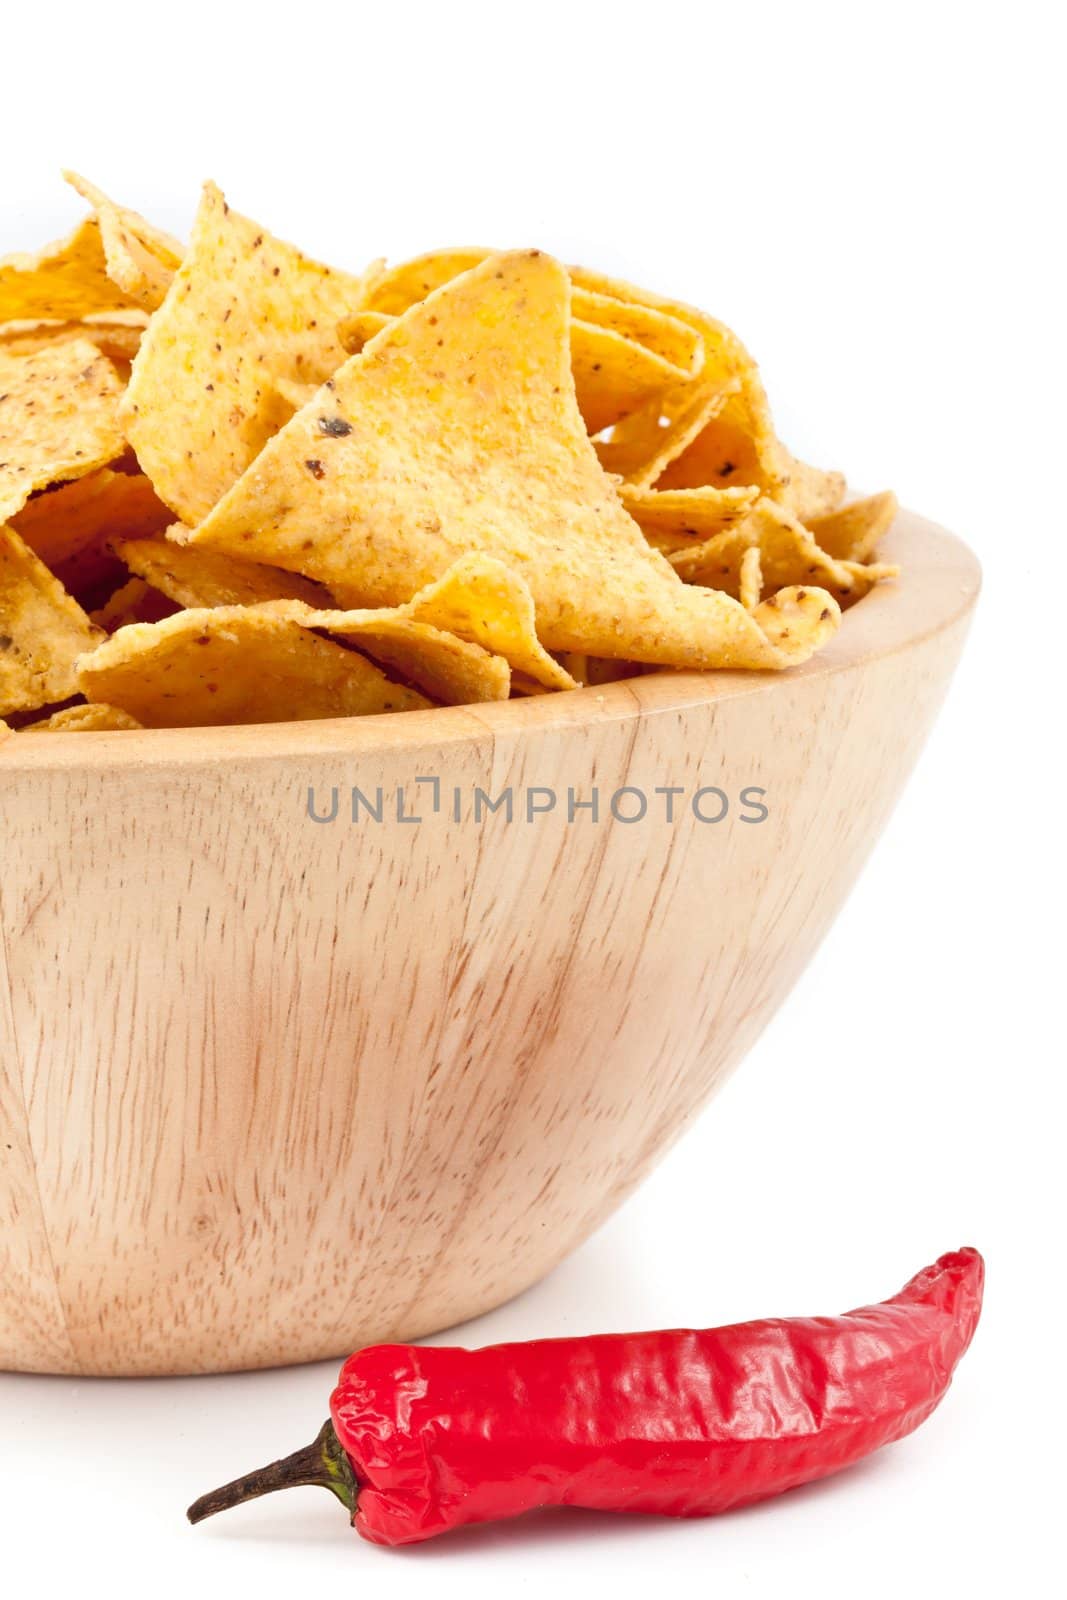 Pimento near to a bowl of crisps against white background